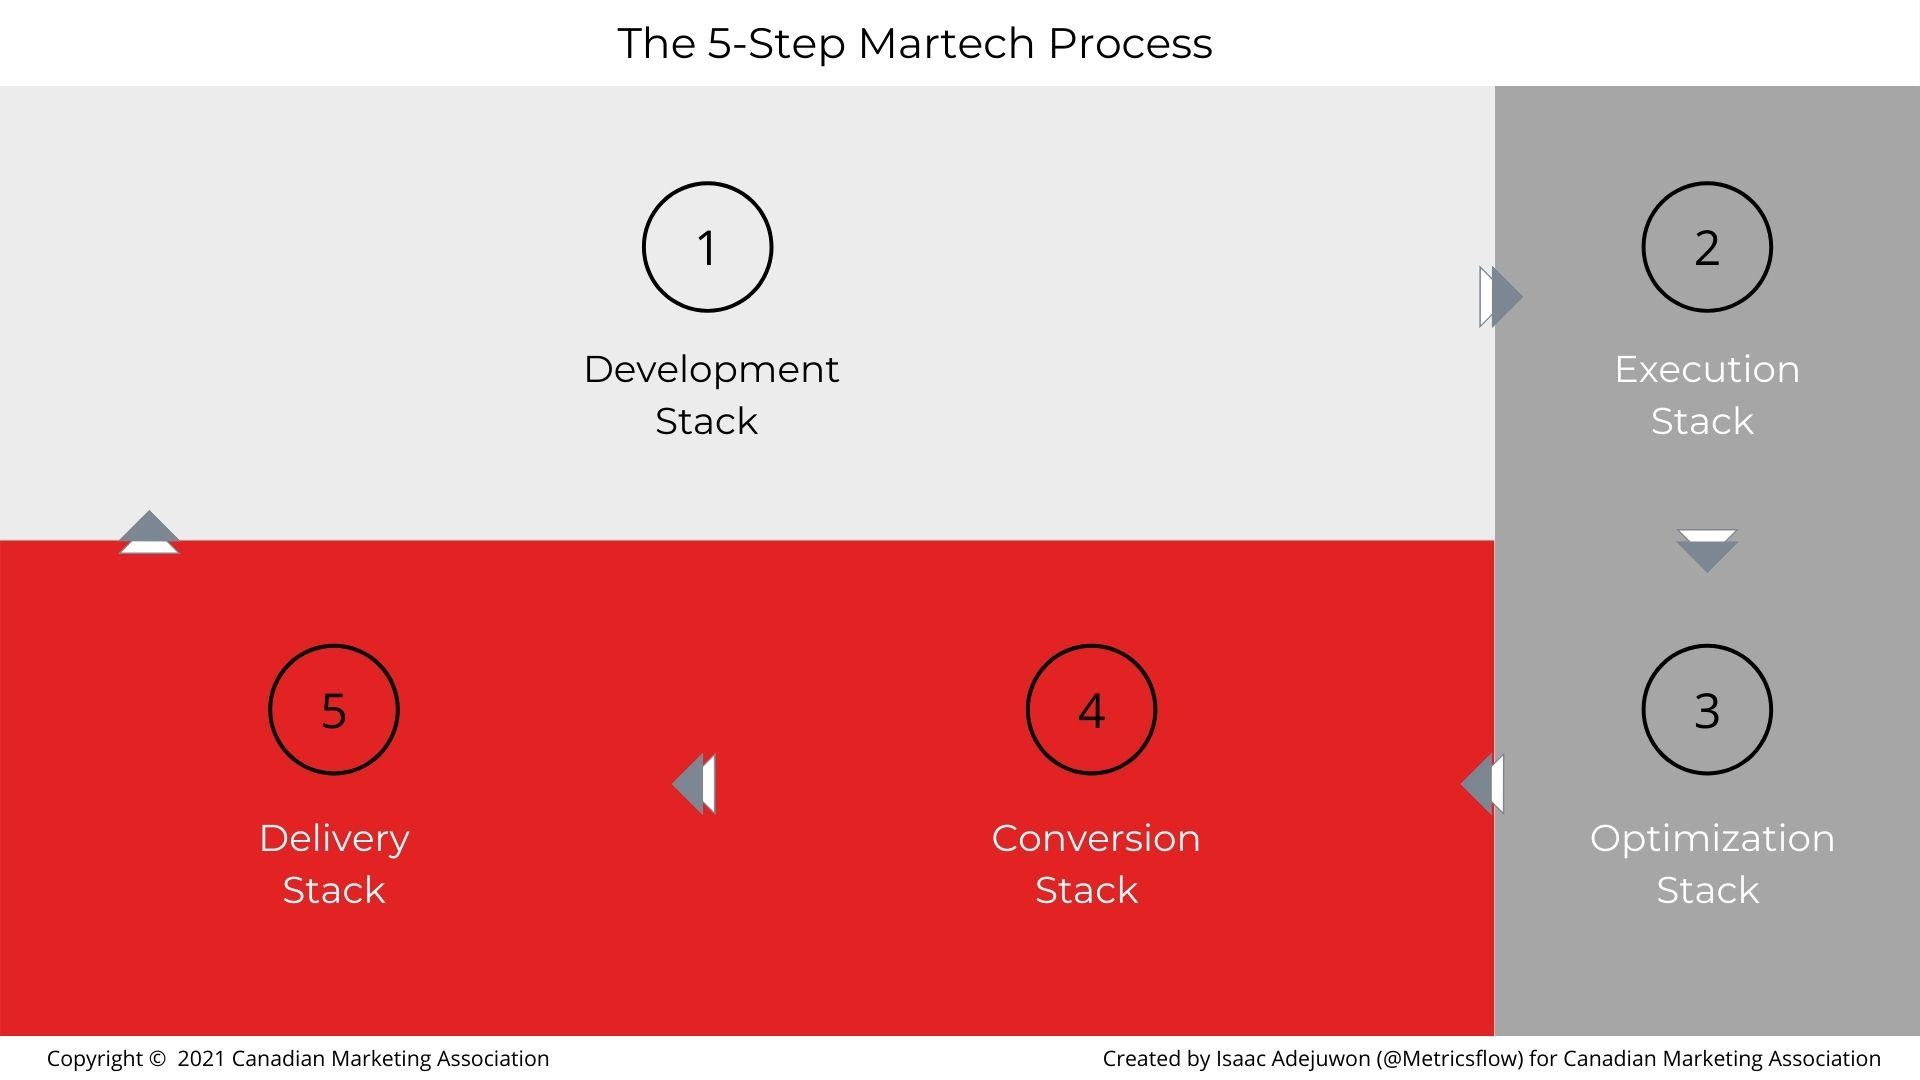 1 - Development Stack. 2 - Execution Stack. 3 - Optimization Stack. 4 - Conversion Stack. 5 - Delivery Stack.